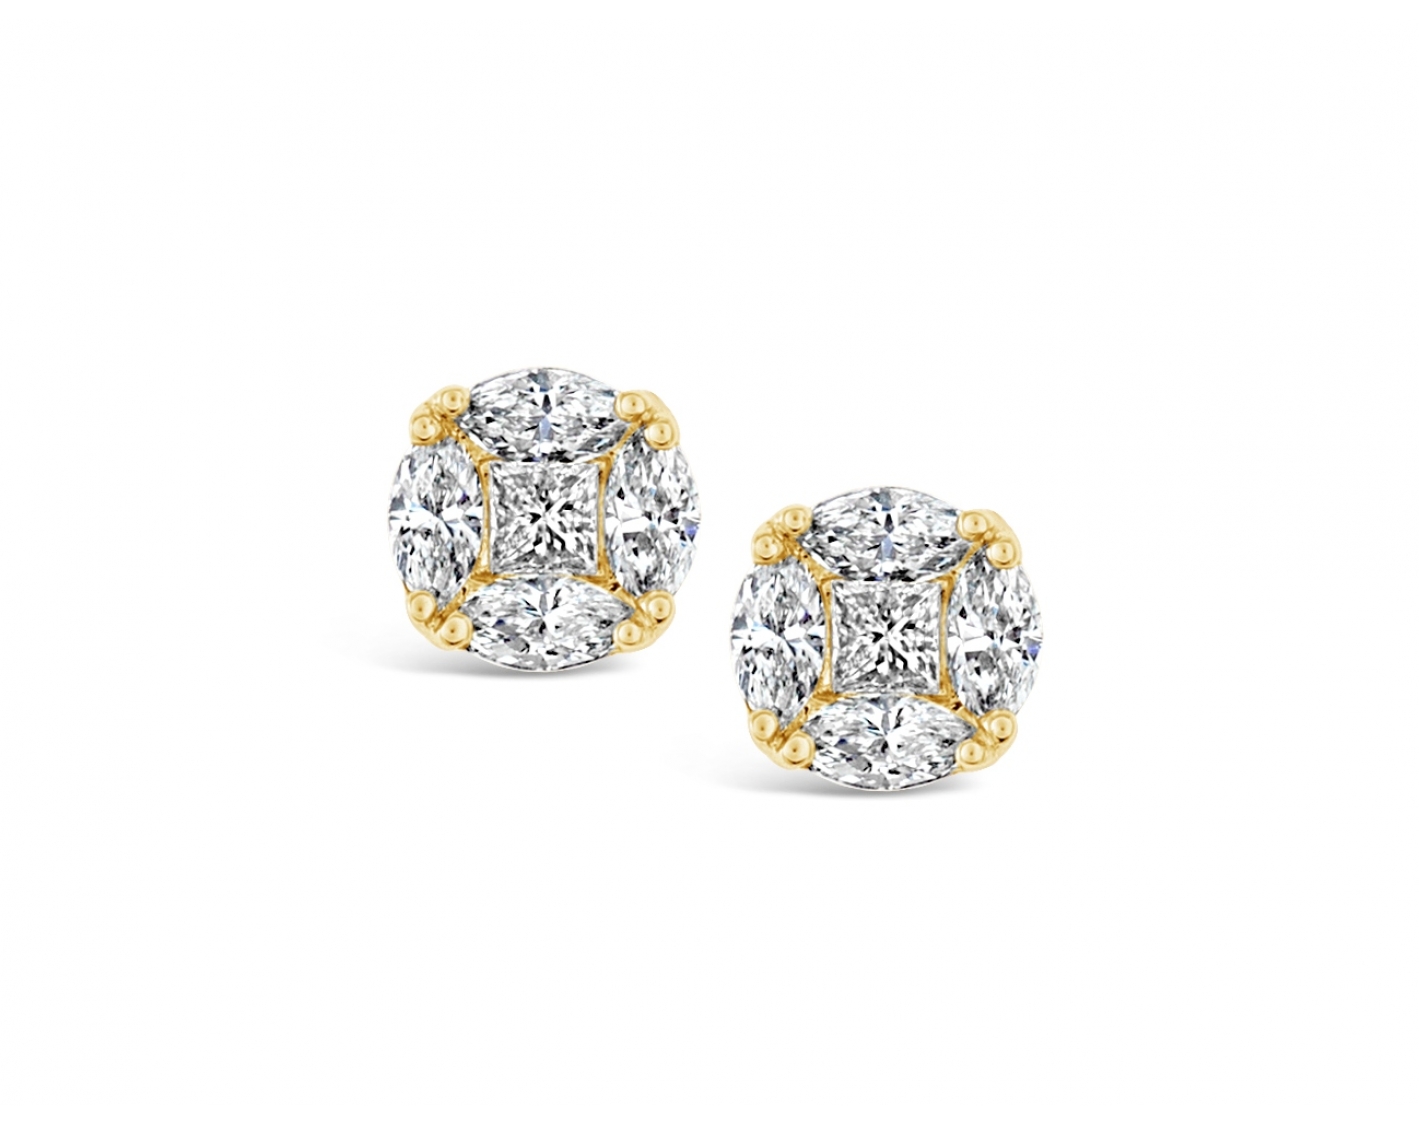 18k white gold illusion set stud earrings with princess & marquises diamonds Photos & images